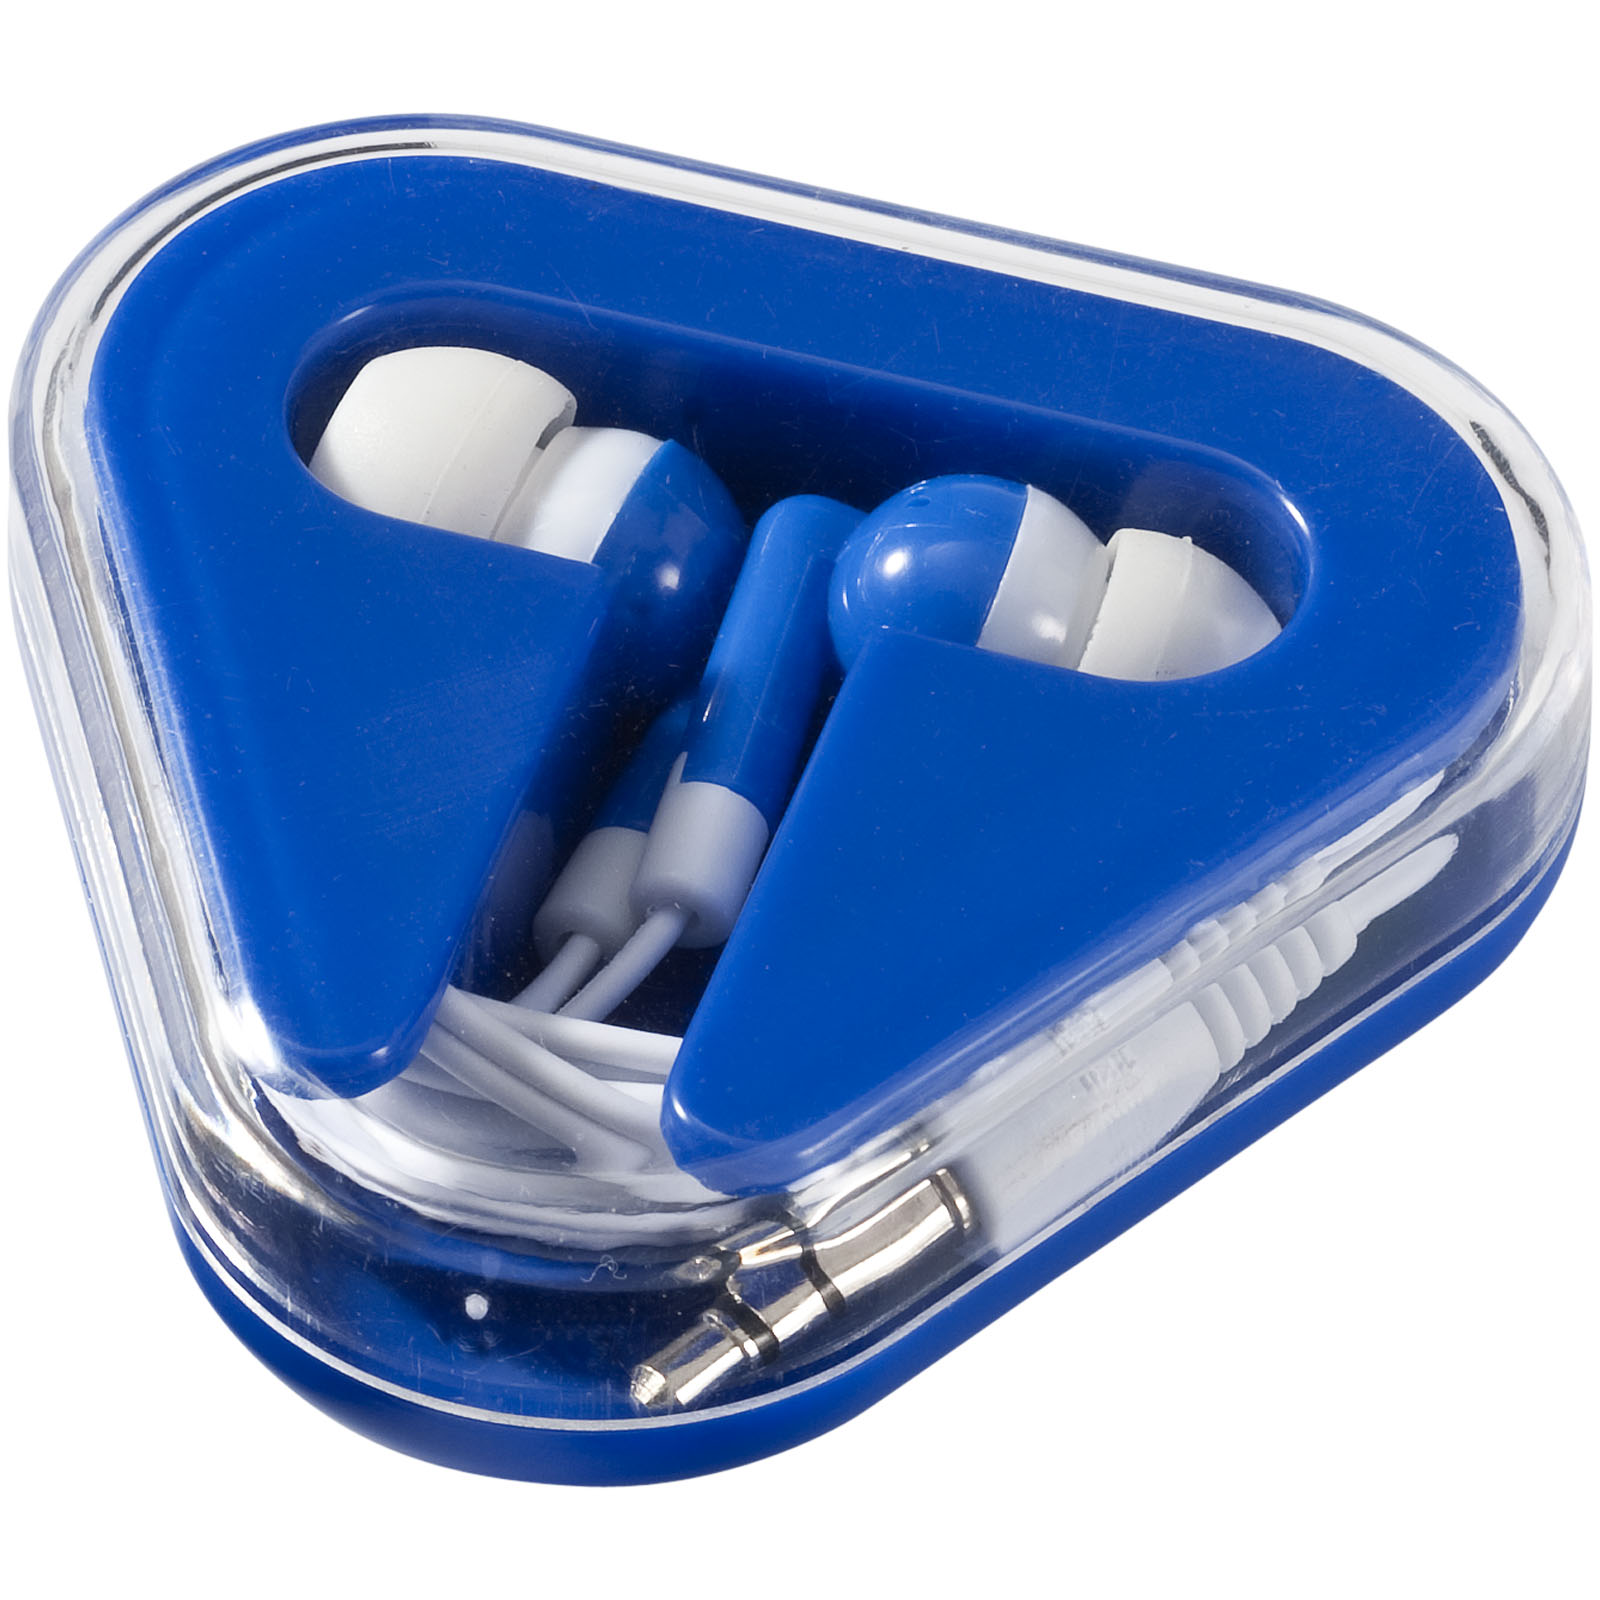 MusicMate Earbuds - Slaughterford - Pitlochry